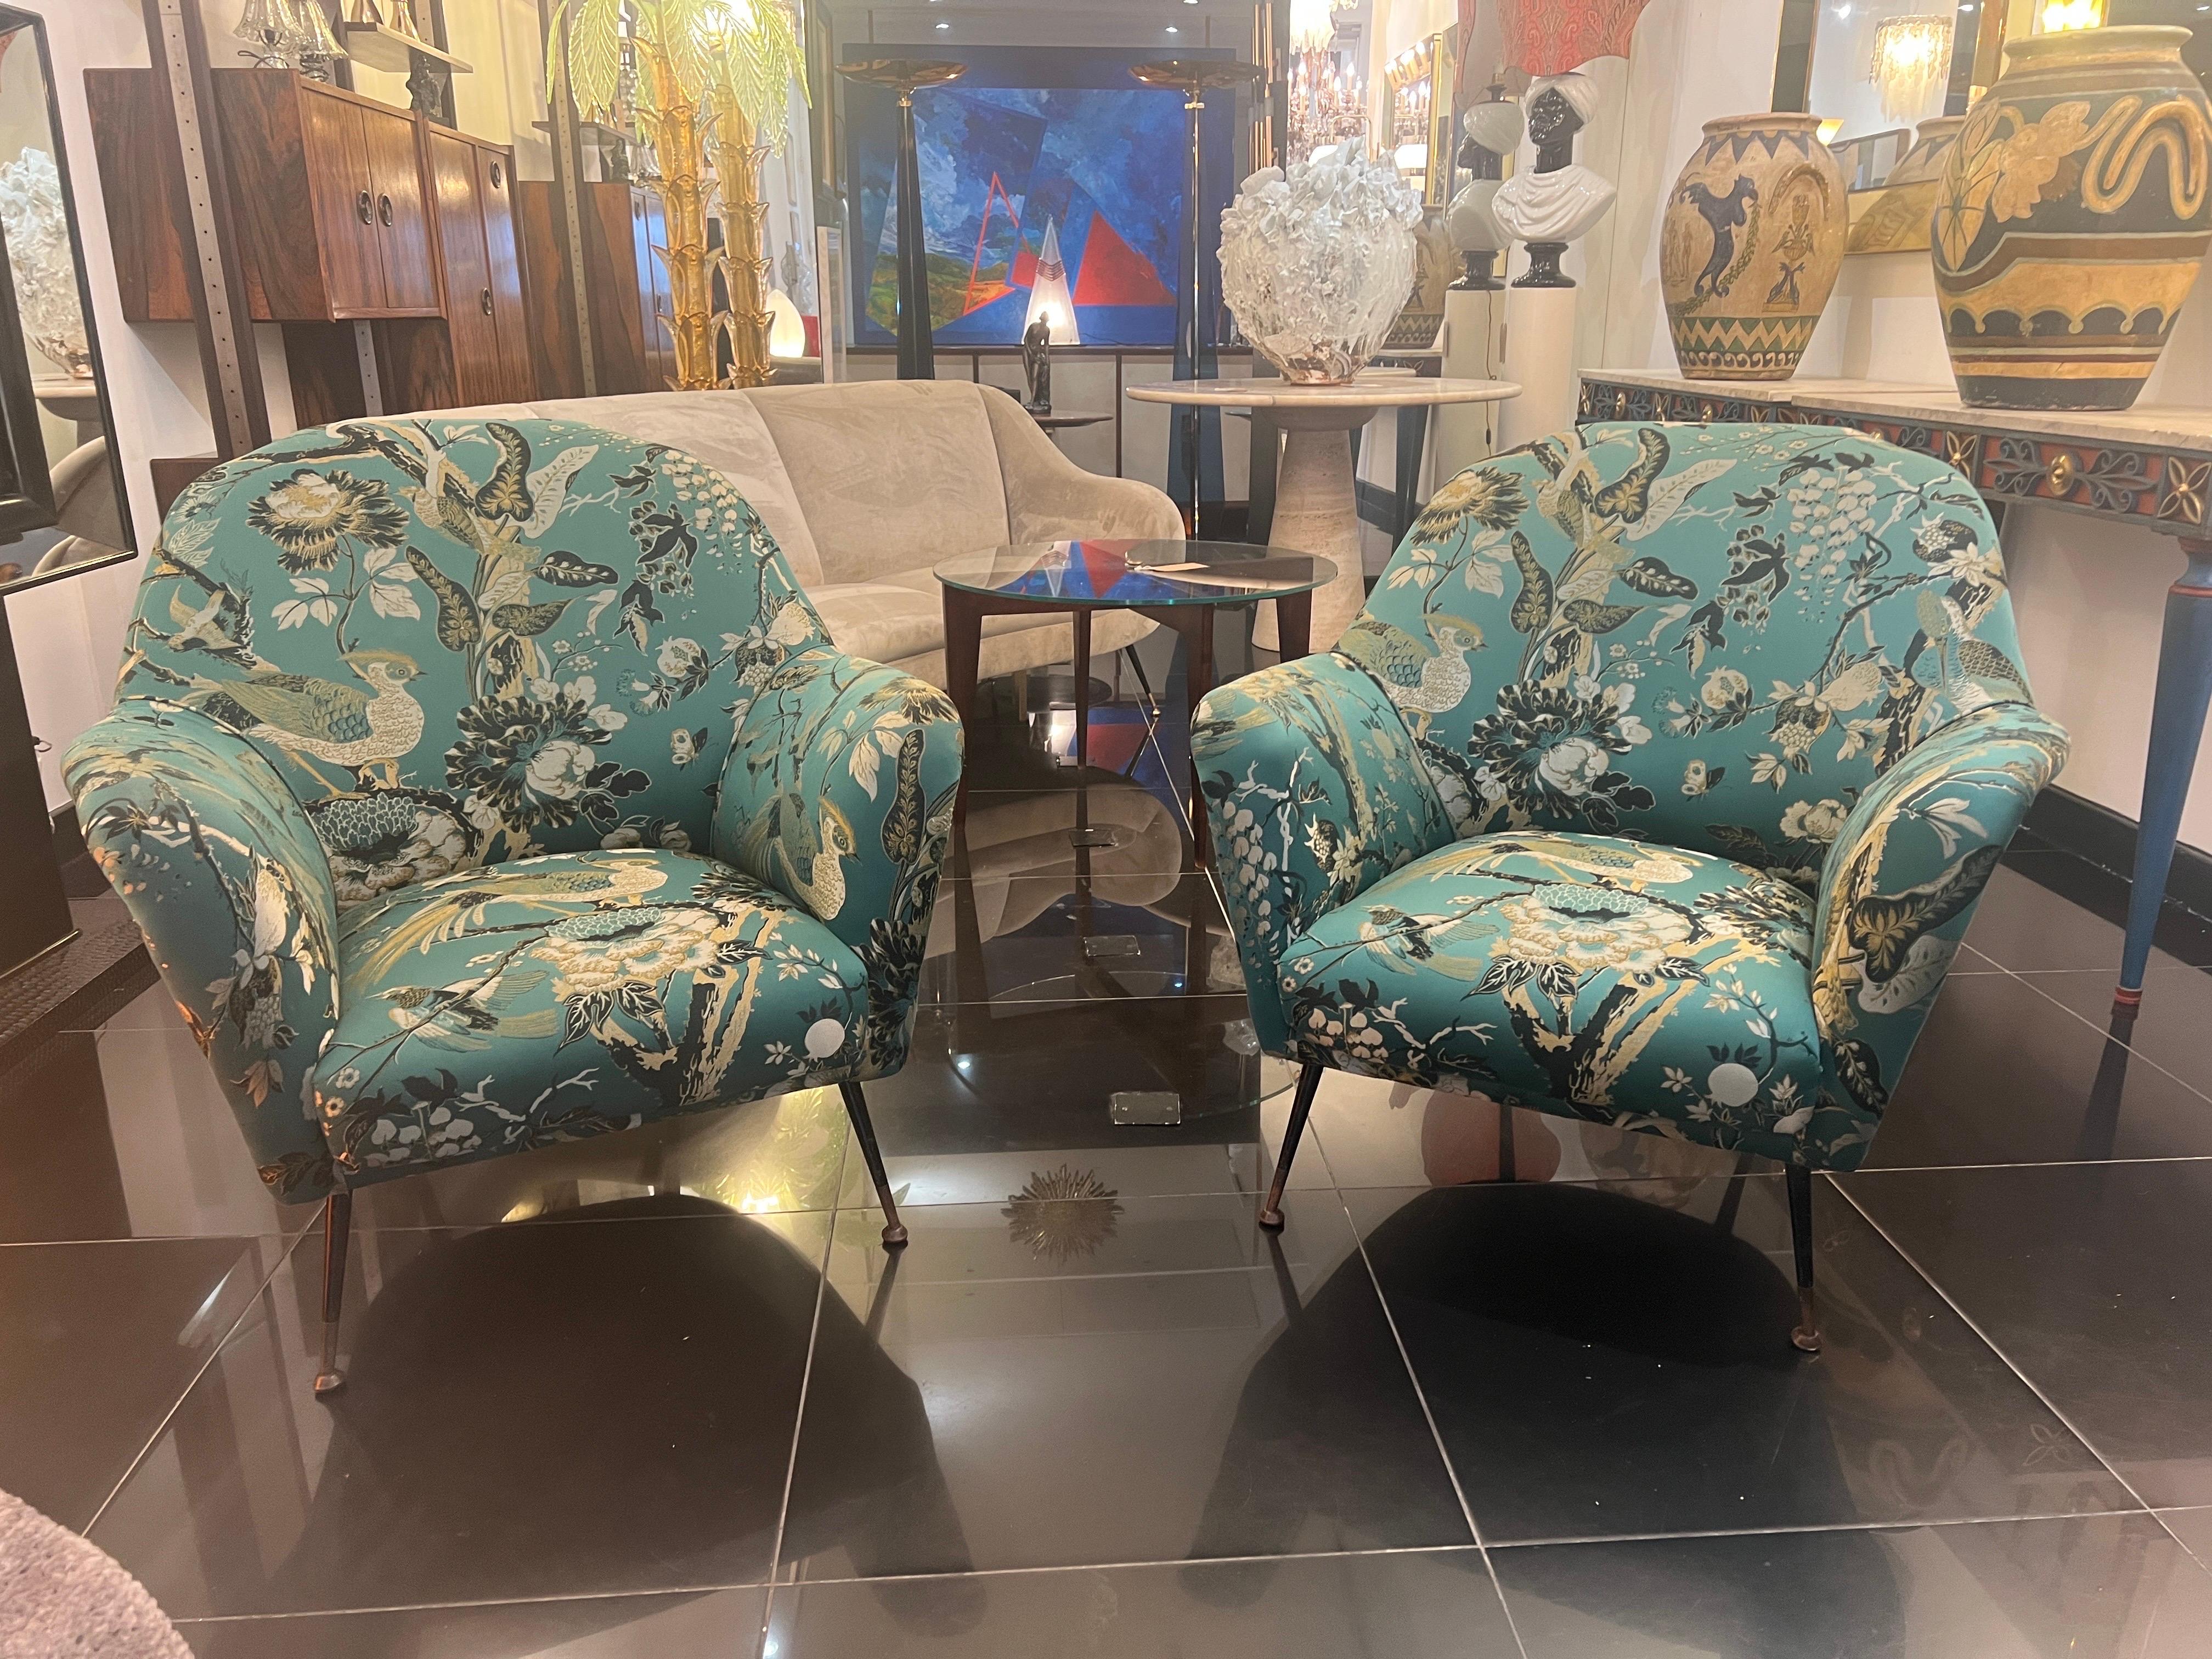 A fine pair of Italian 1950s armchairs beautifully upholstered in botanical birds silk fabric with raised embroidery. Spectacular design and details. The armchairs are supported by four conical legs in black enamelled steel with brass sabots. 